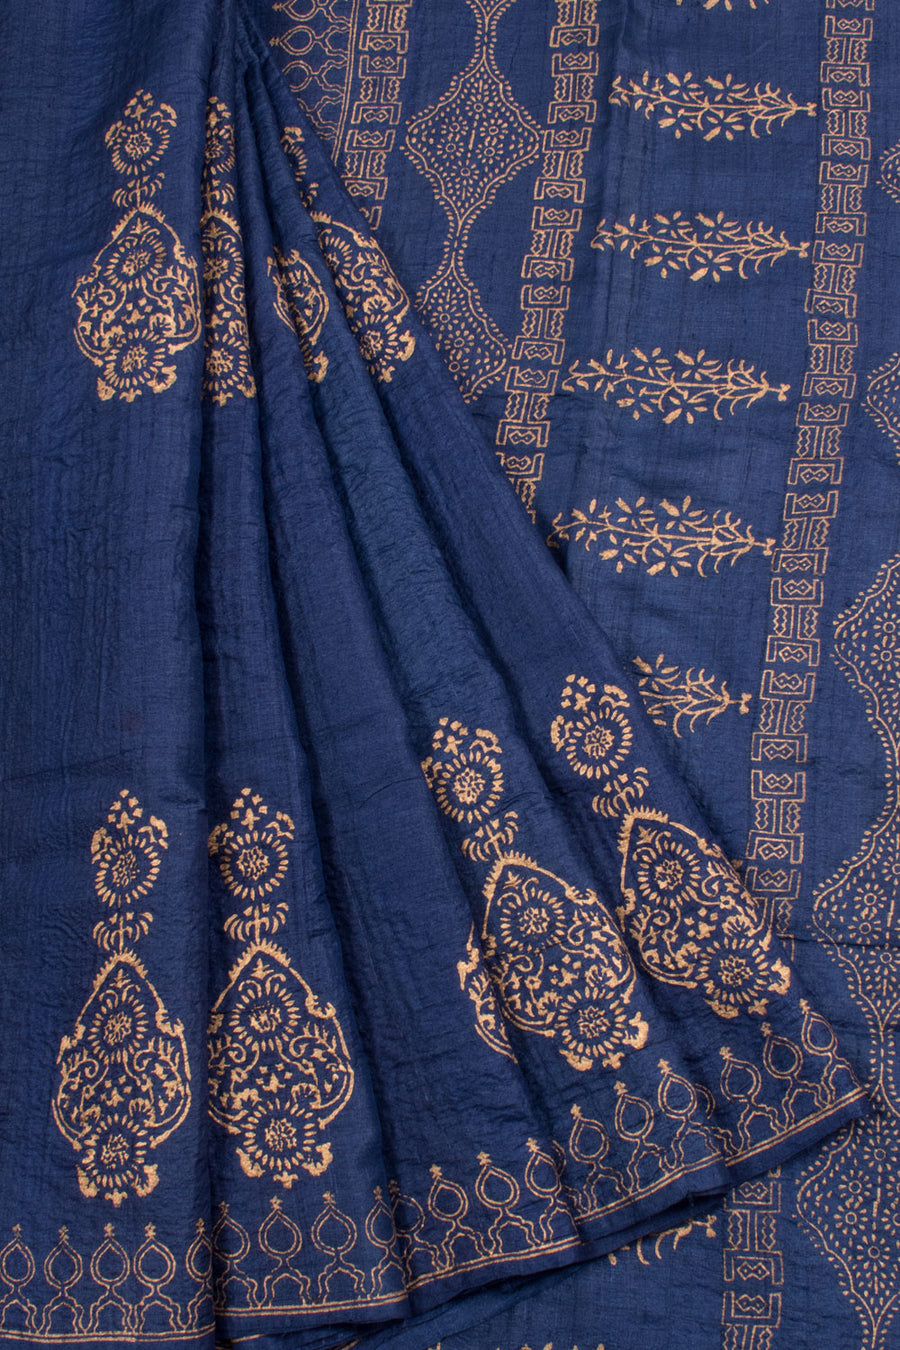 Hand Block Printed Tussar Silk Saree with Mughal Design and Fancy Tassels